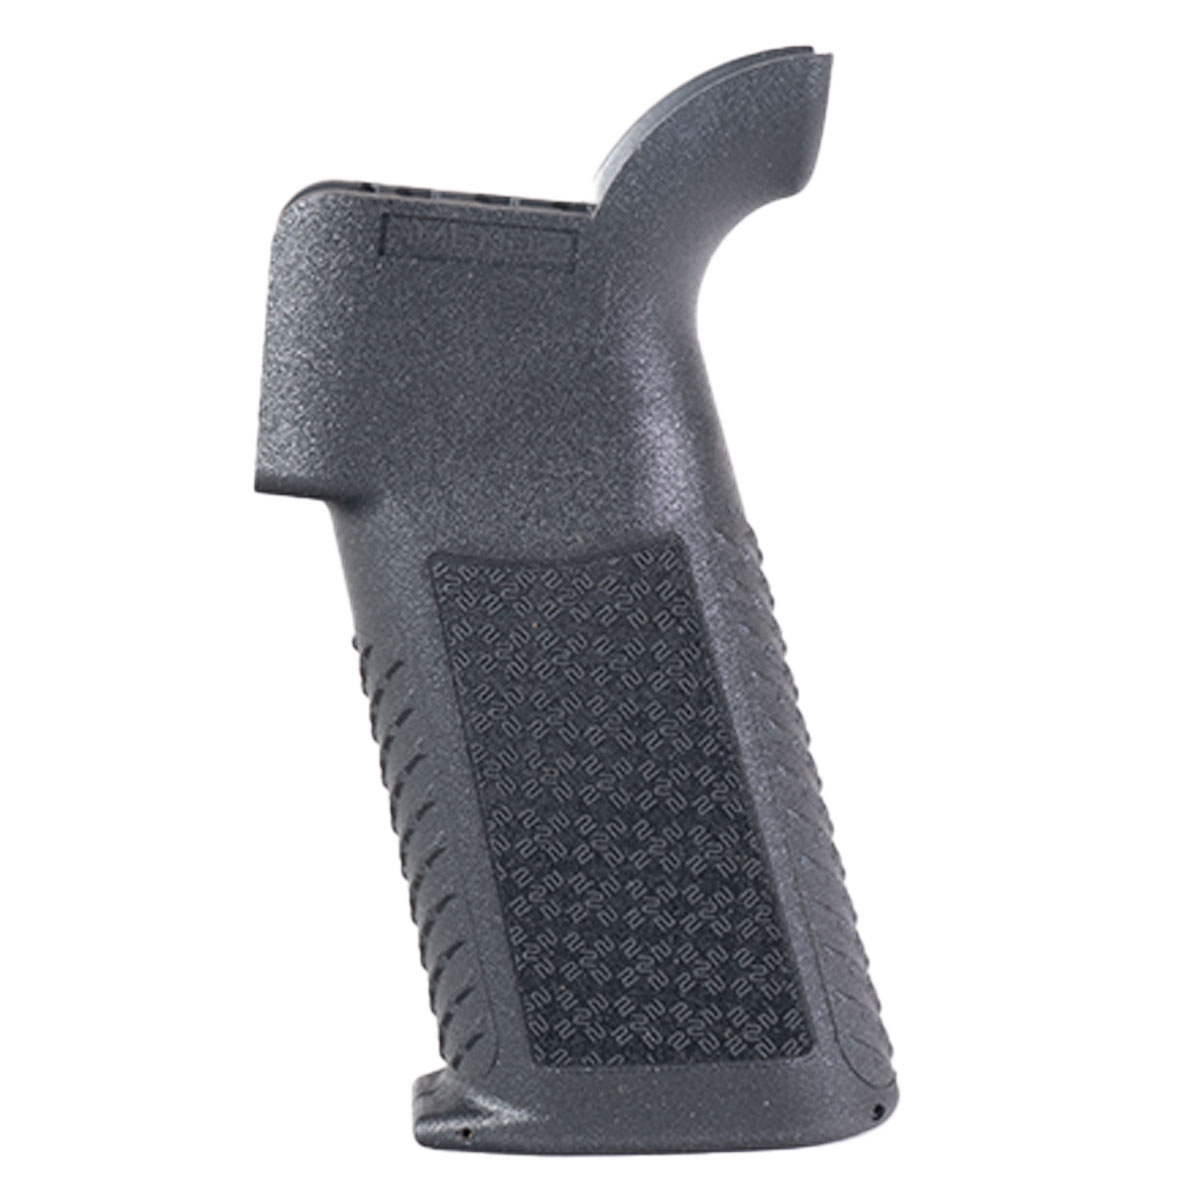 Amend2 AR-15/AR-10 Pistol Grip Aggressive 19 Degree Angle High Strength Polymer With Compartment Door